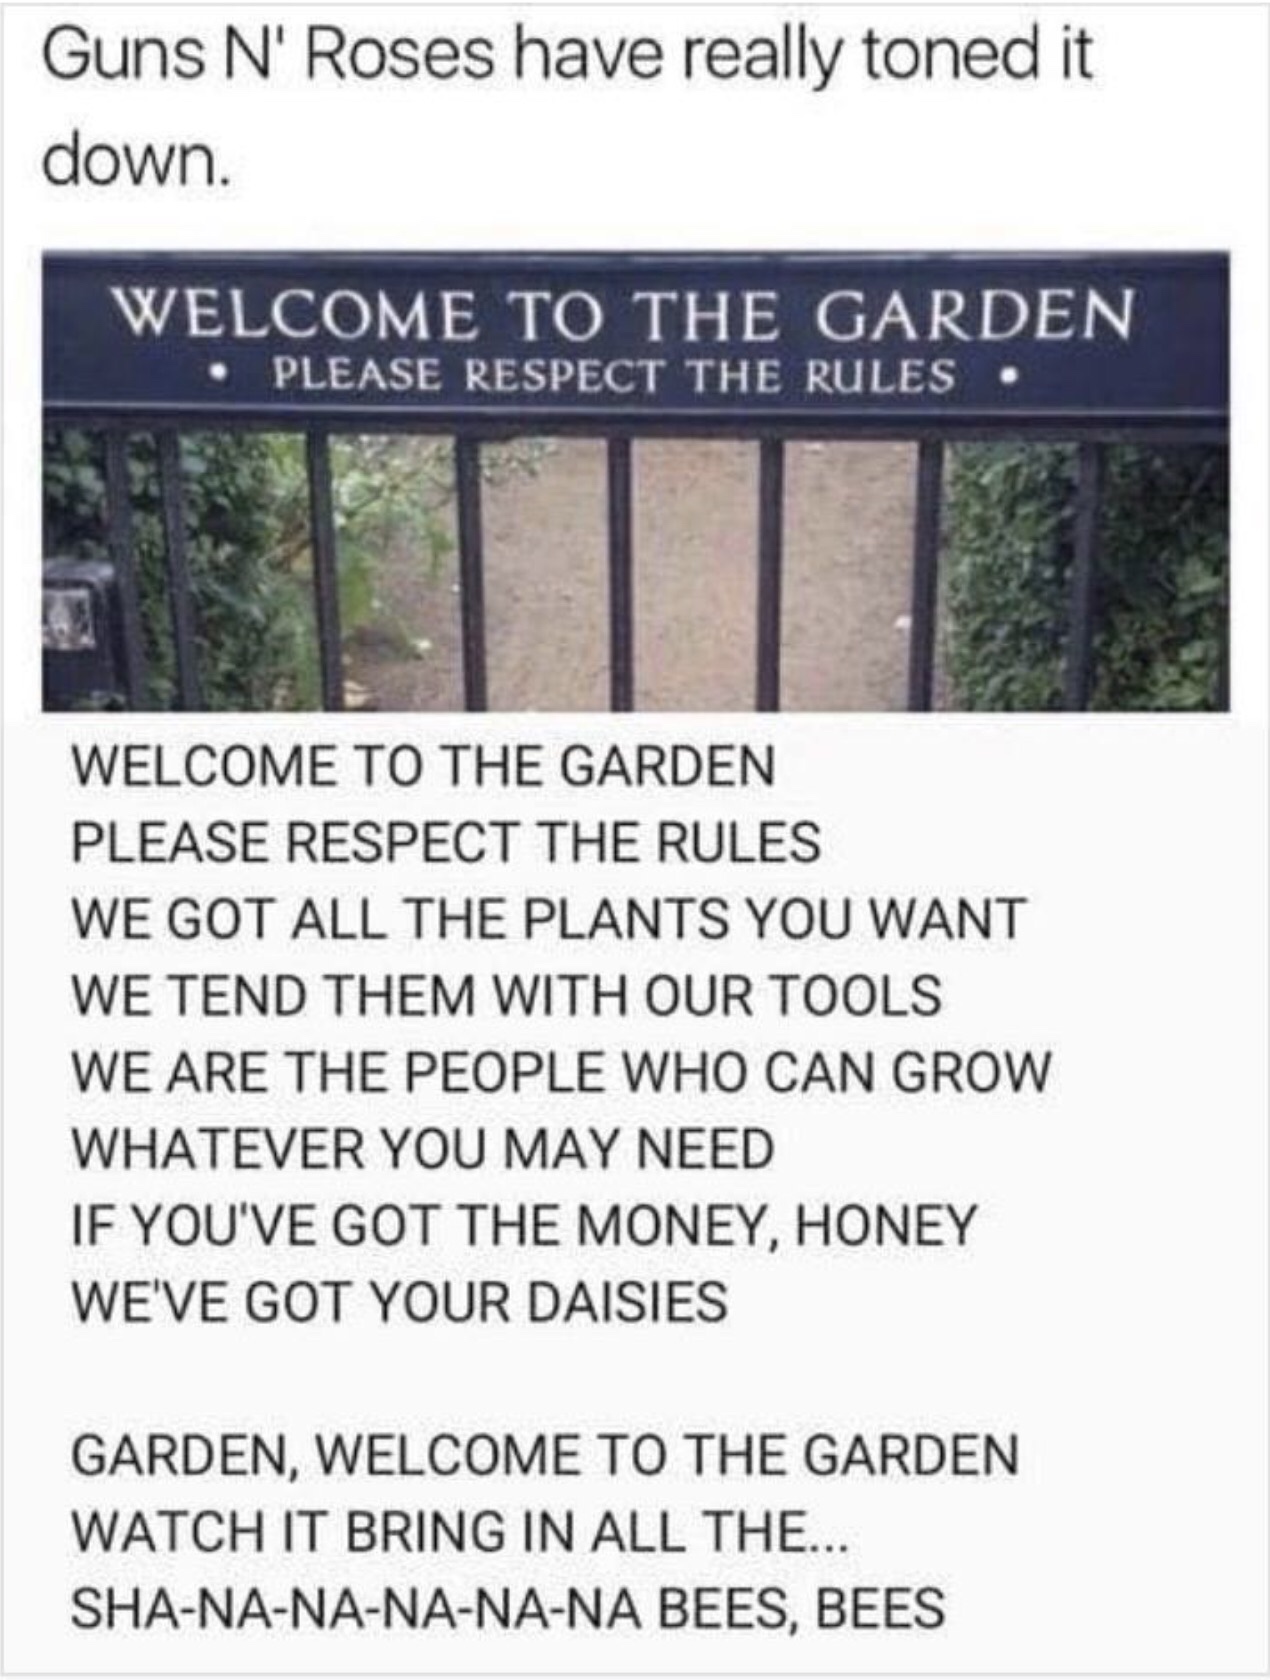 welcome to the garden guns and roses - Guns N' Roses have really toned it down. Welcome To The Garden Please Respect The Rules Welcome To The Garden Please Respect The Rules We Got All The Plants You Want We Tend Them With Our Tools We Are The People Who 